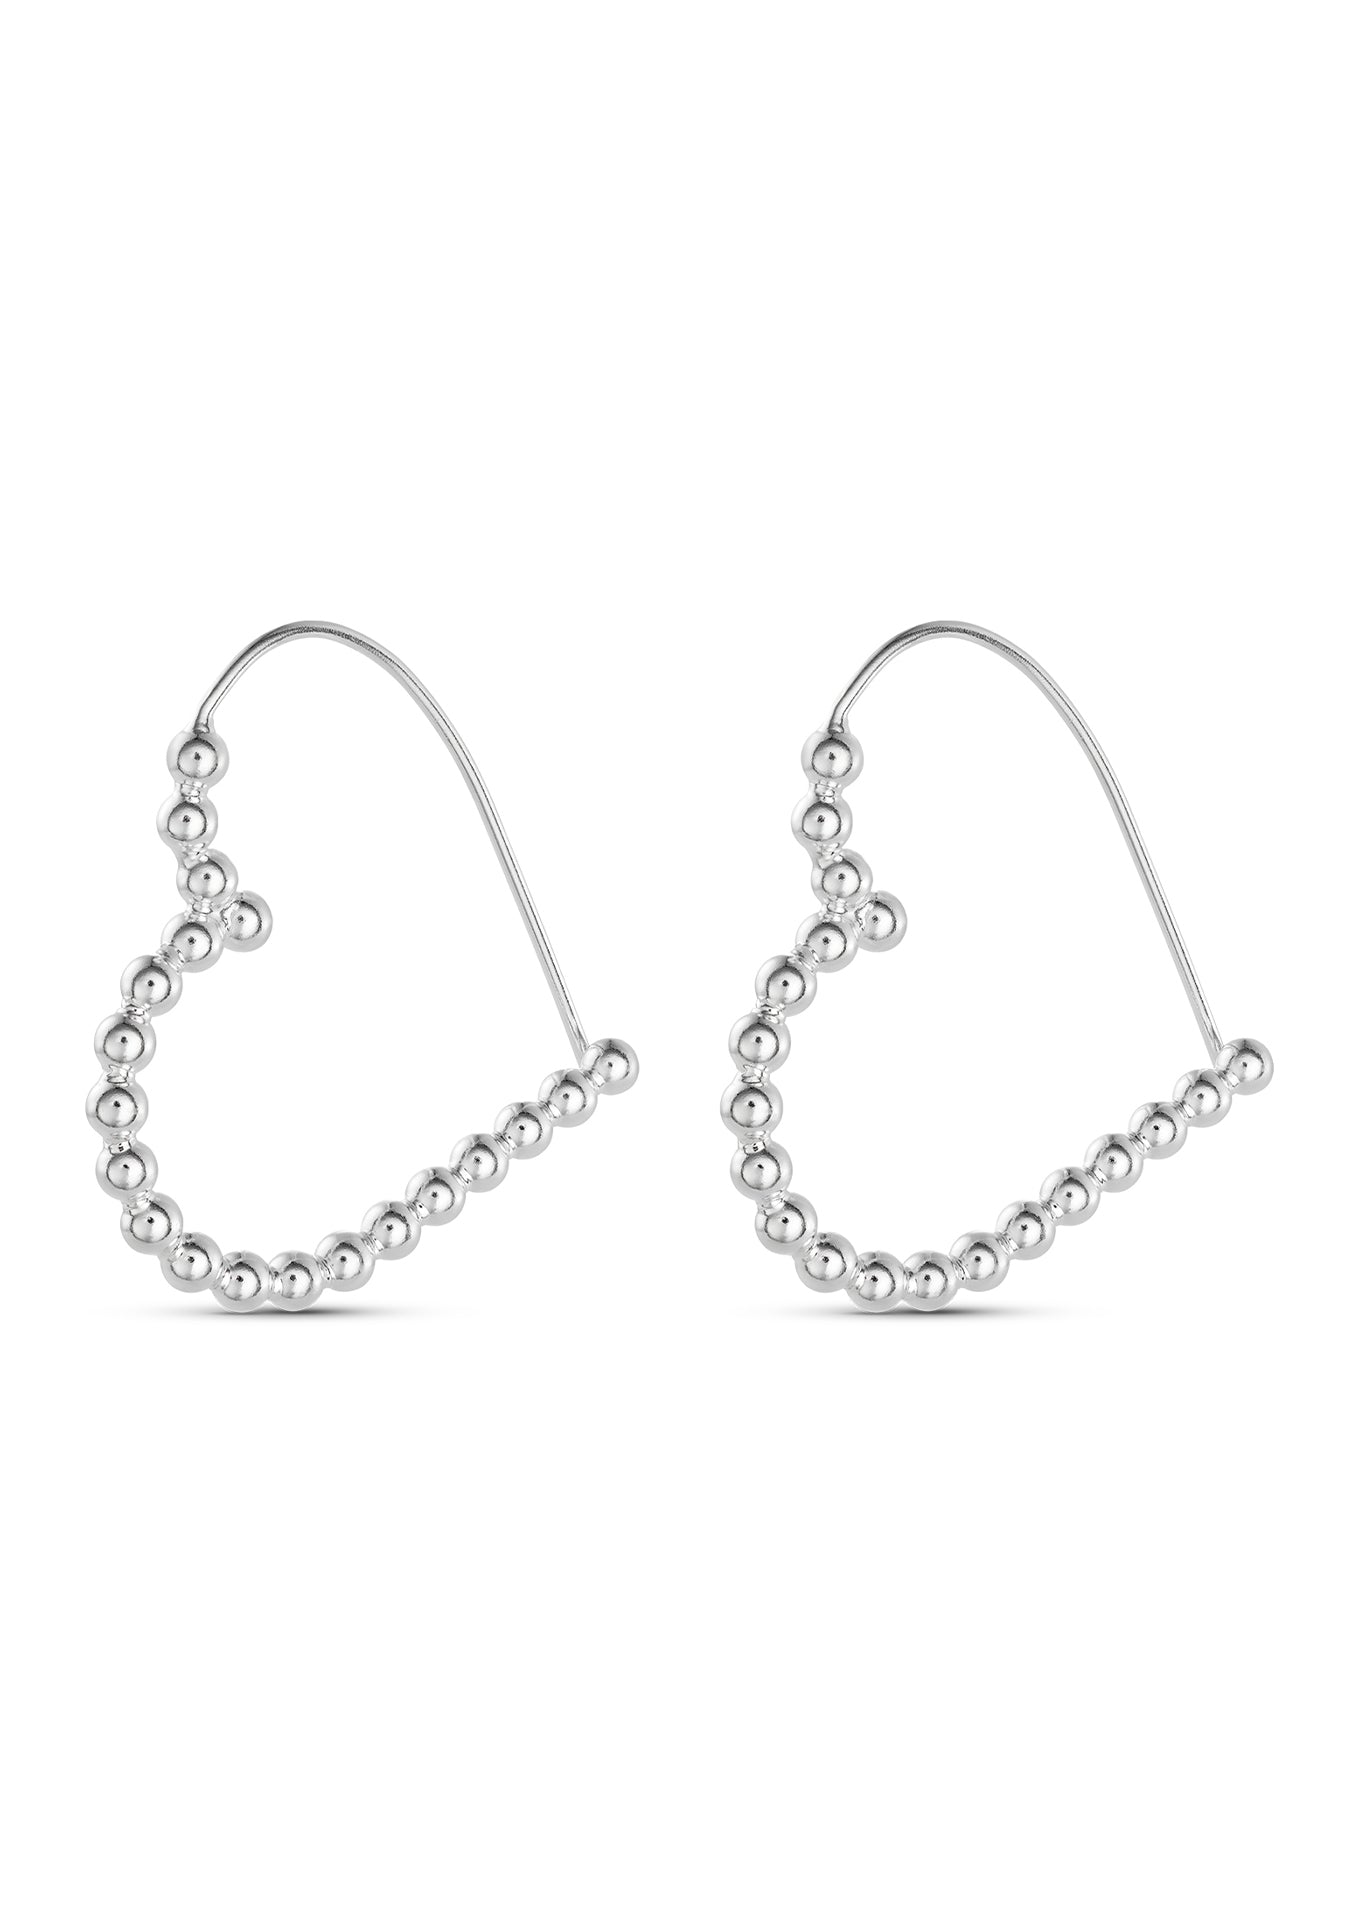 Bold_Love_Hoops_NOMORE_accessories_sterling_silver